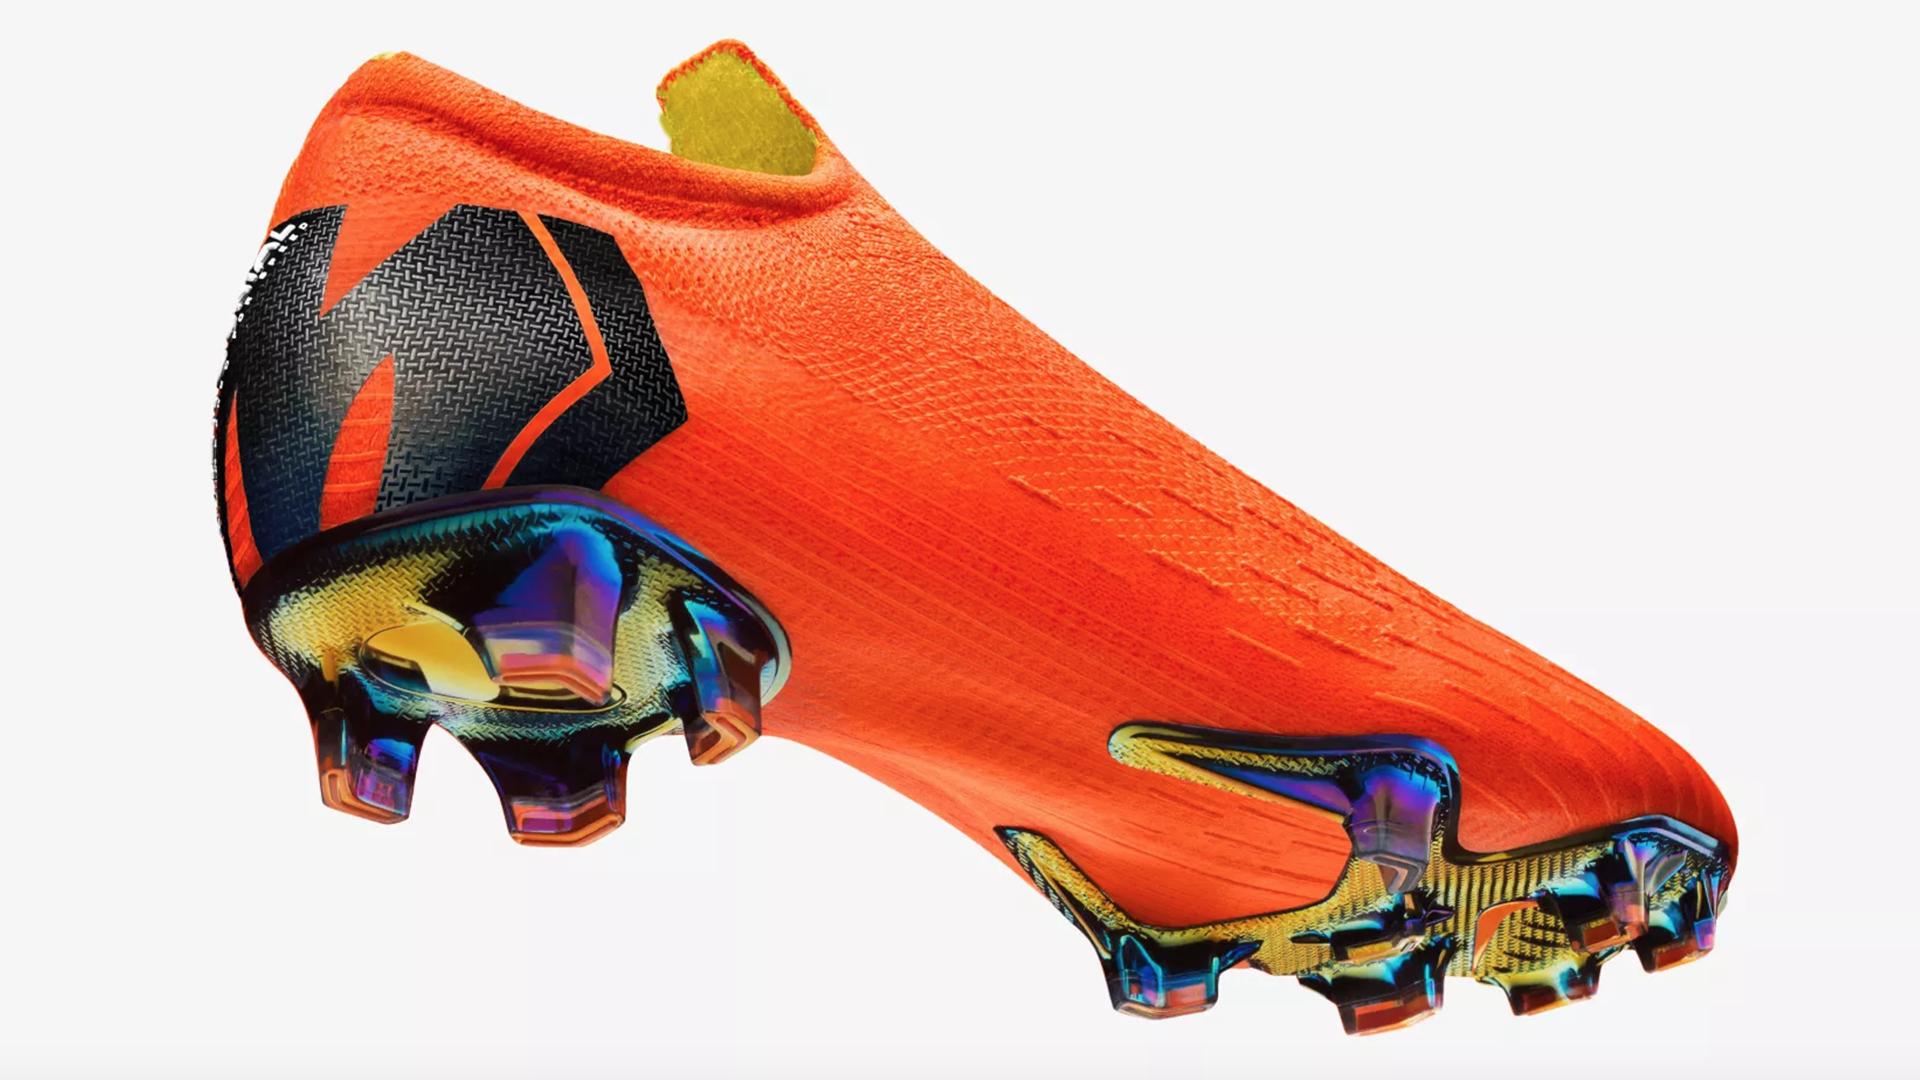 THE ALL NEW MERCURIAL SUPERFLY AND YouTube